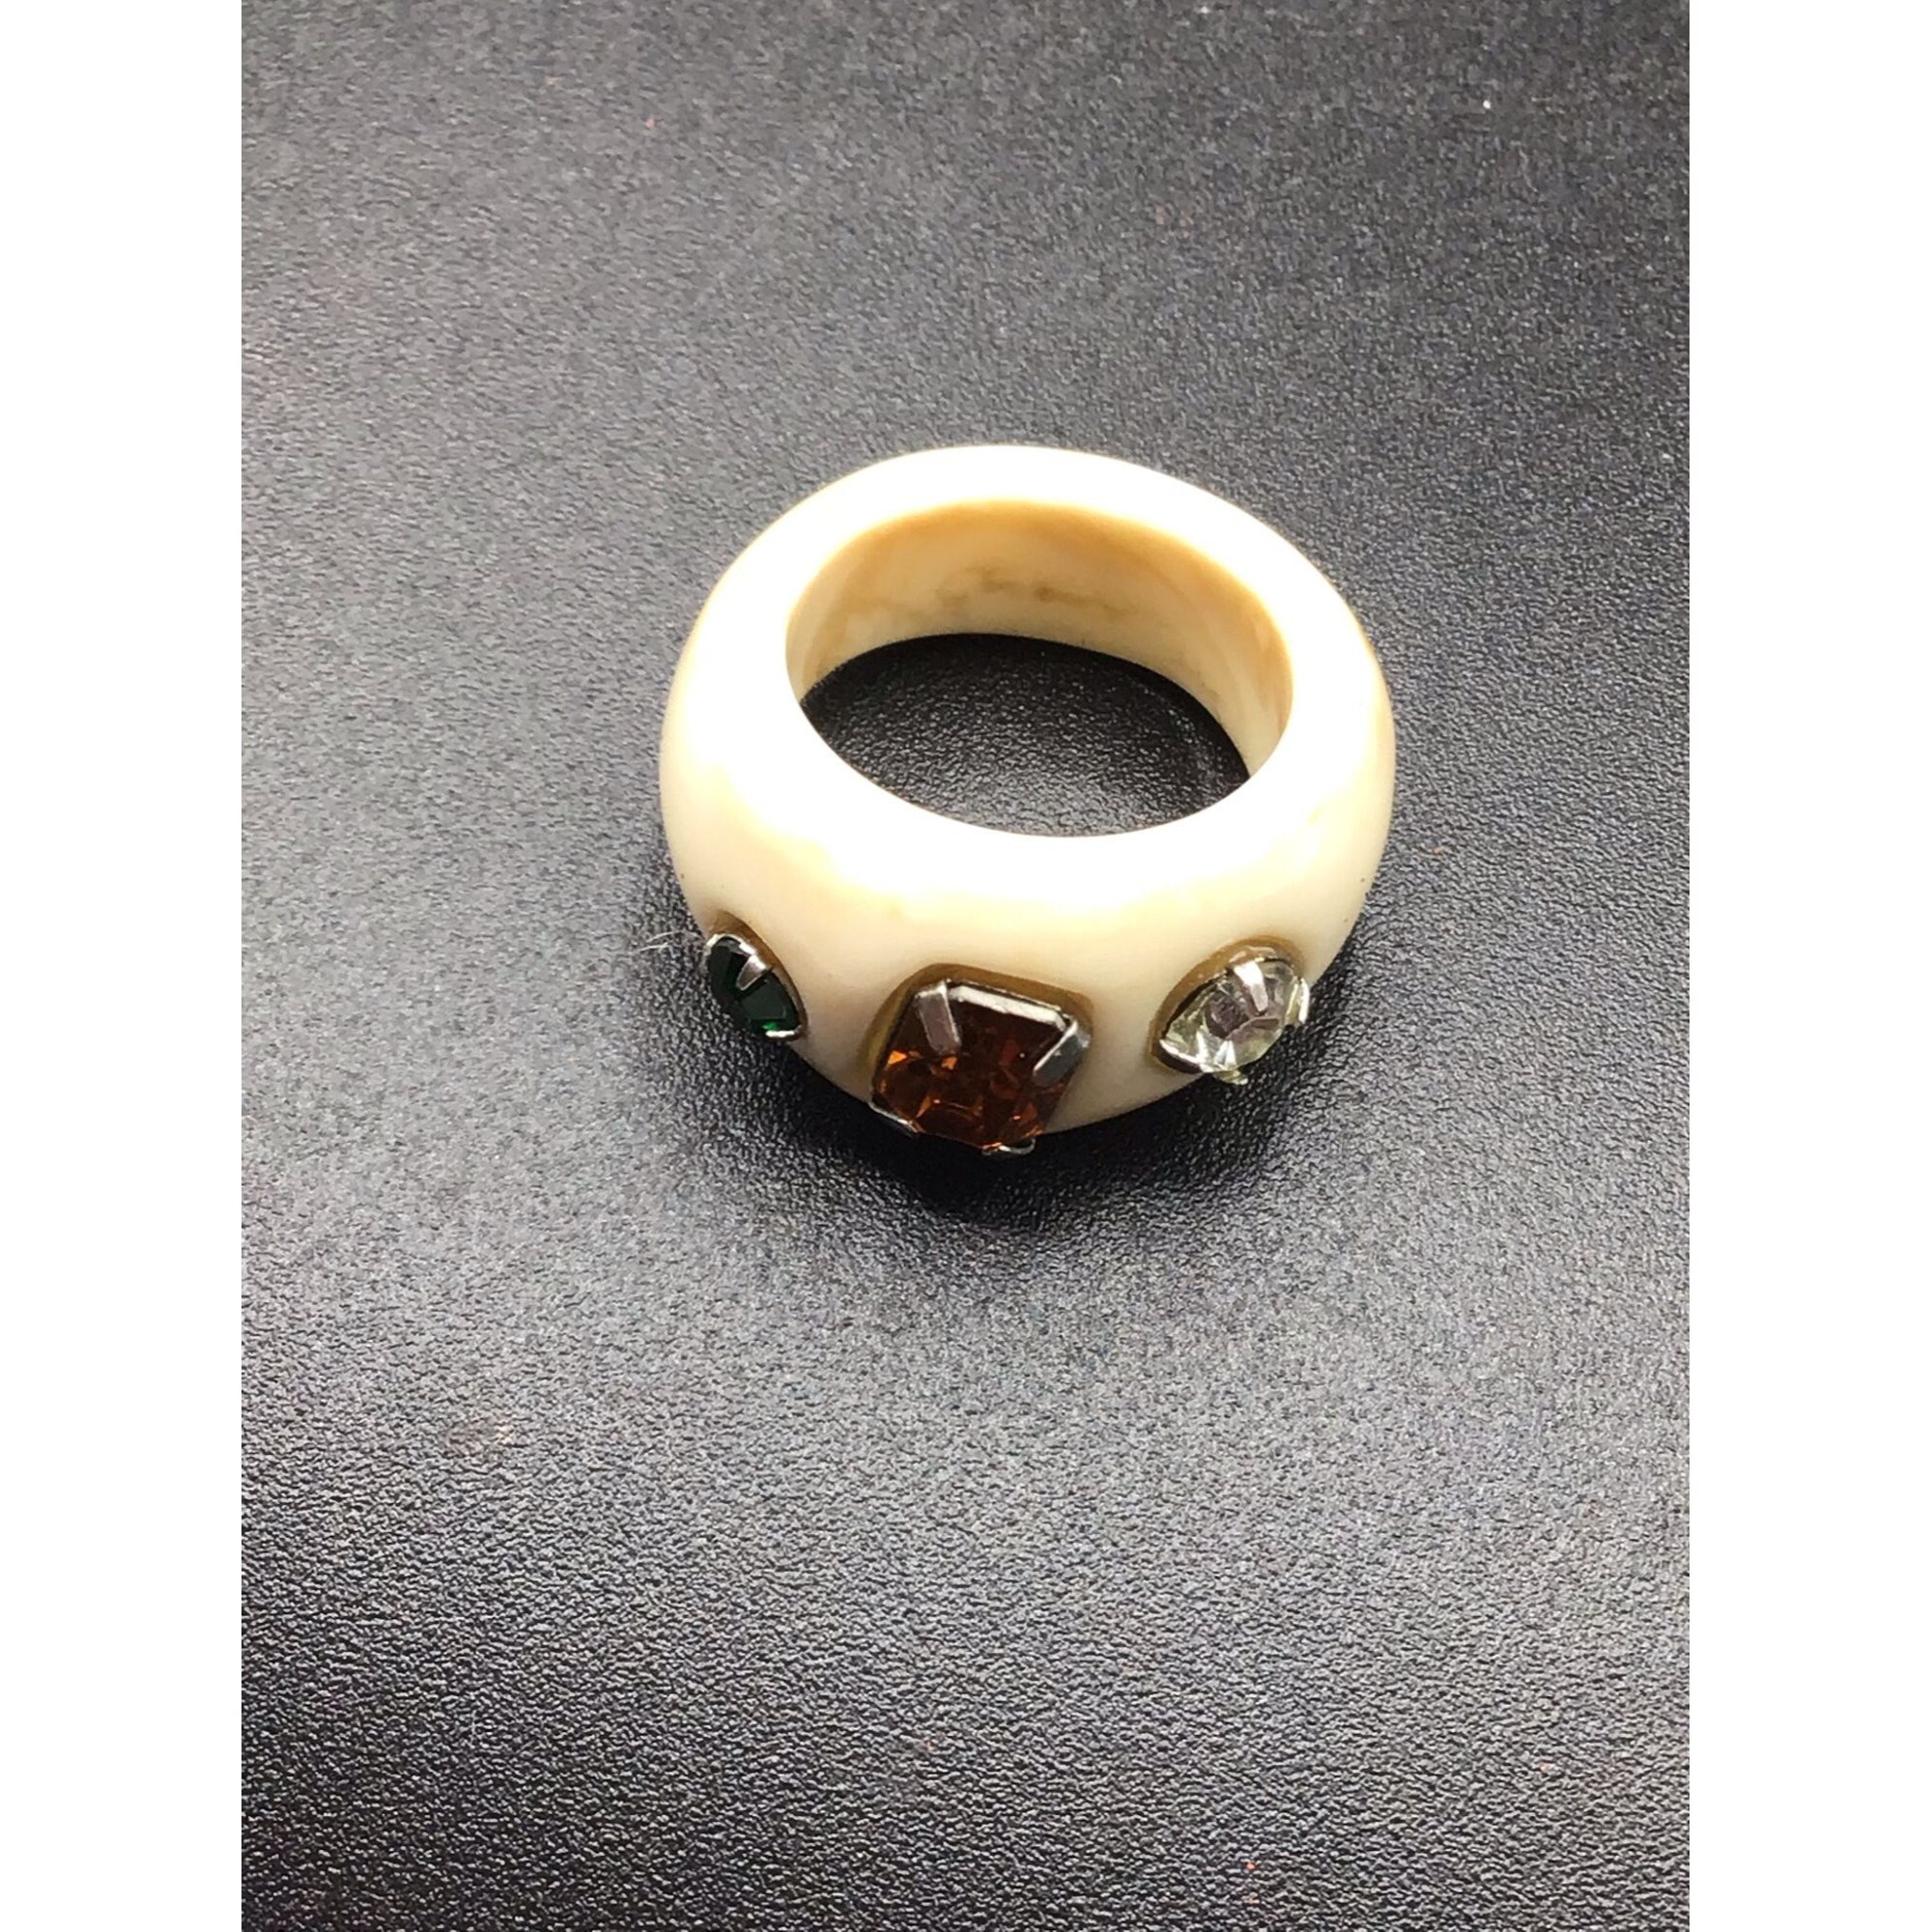 Chanel Vintage Colorful Resin Signet Ring - Size 6.5